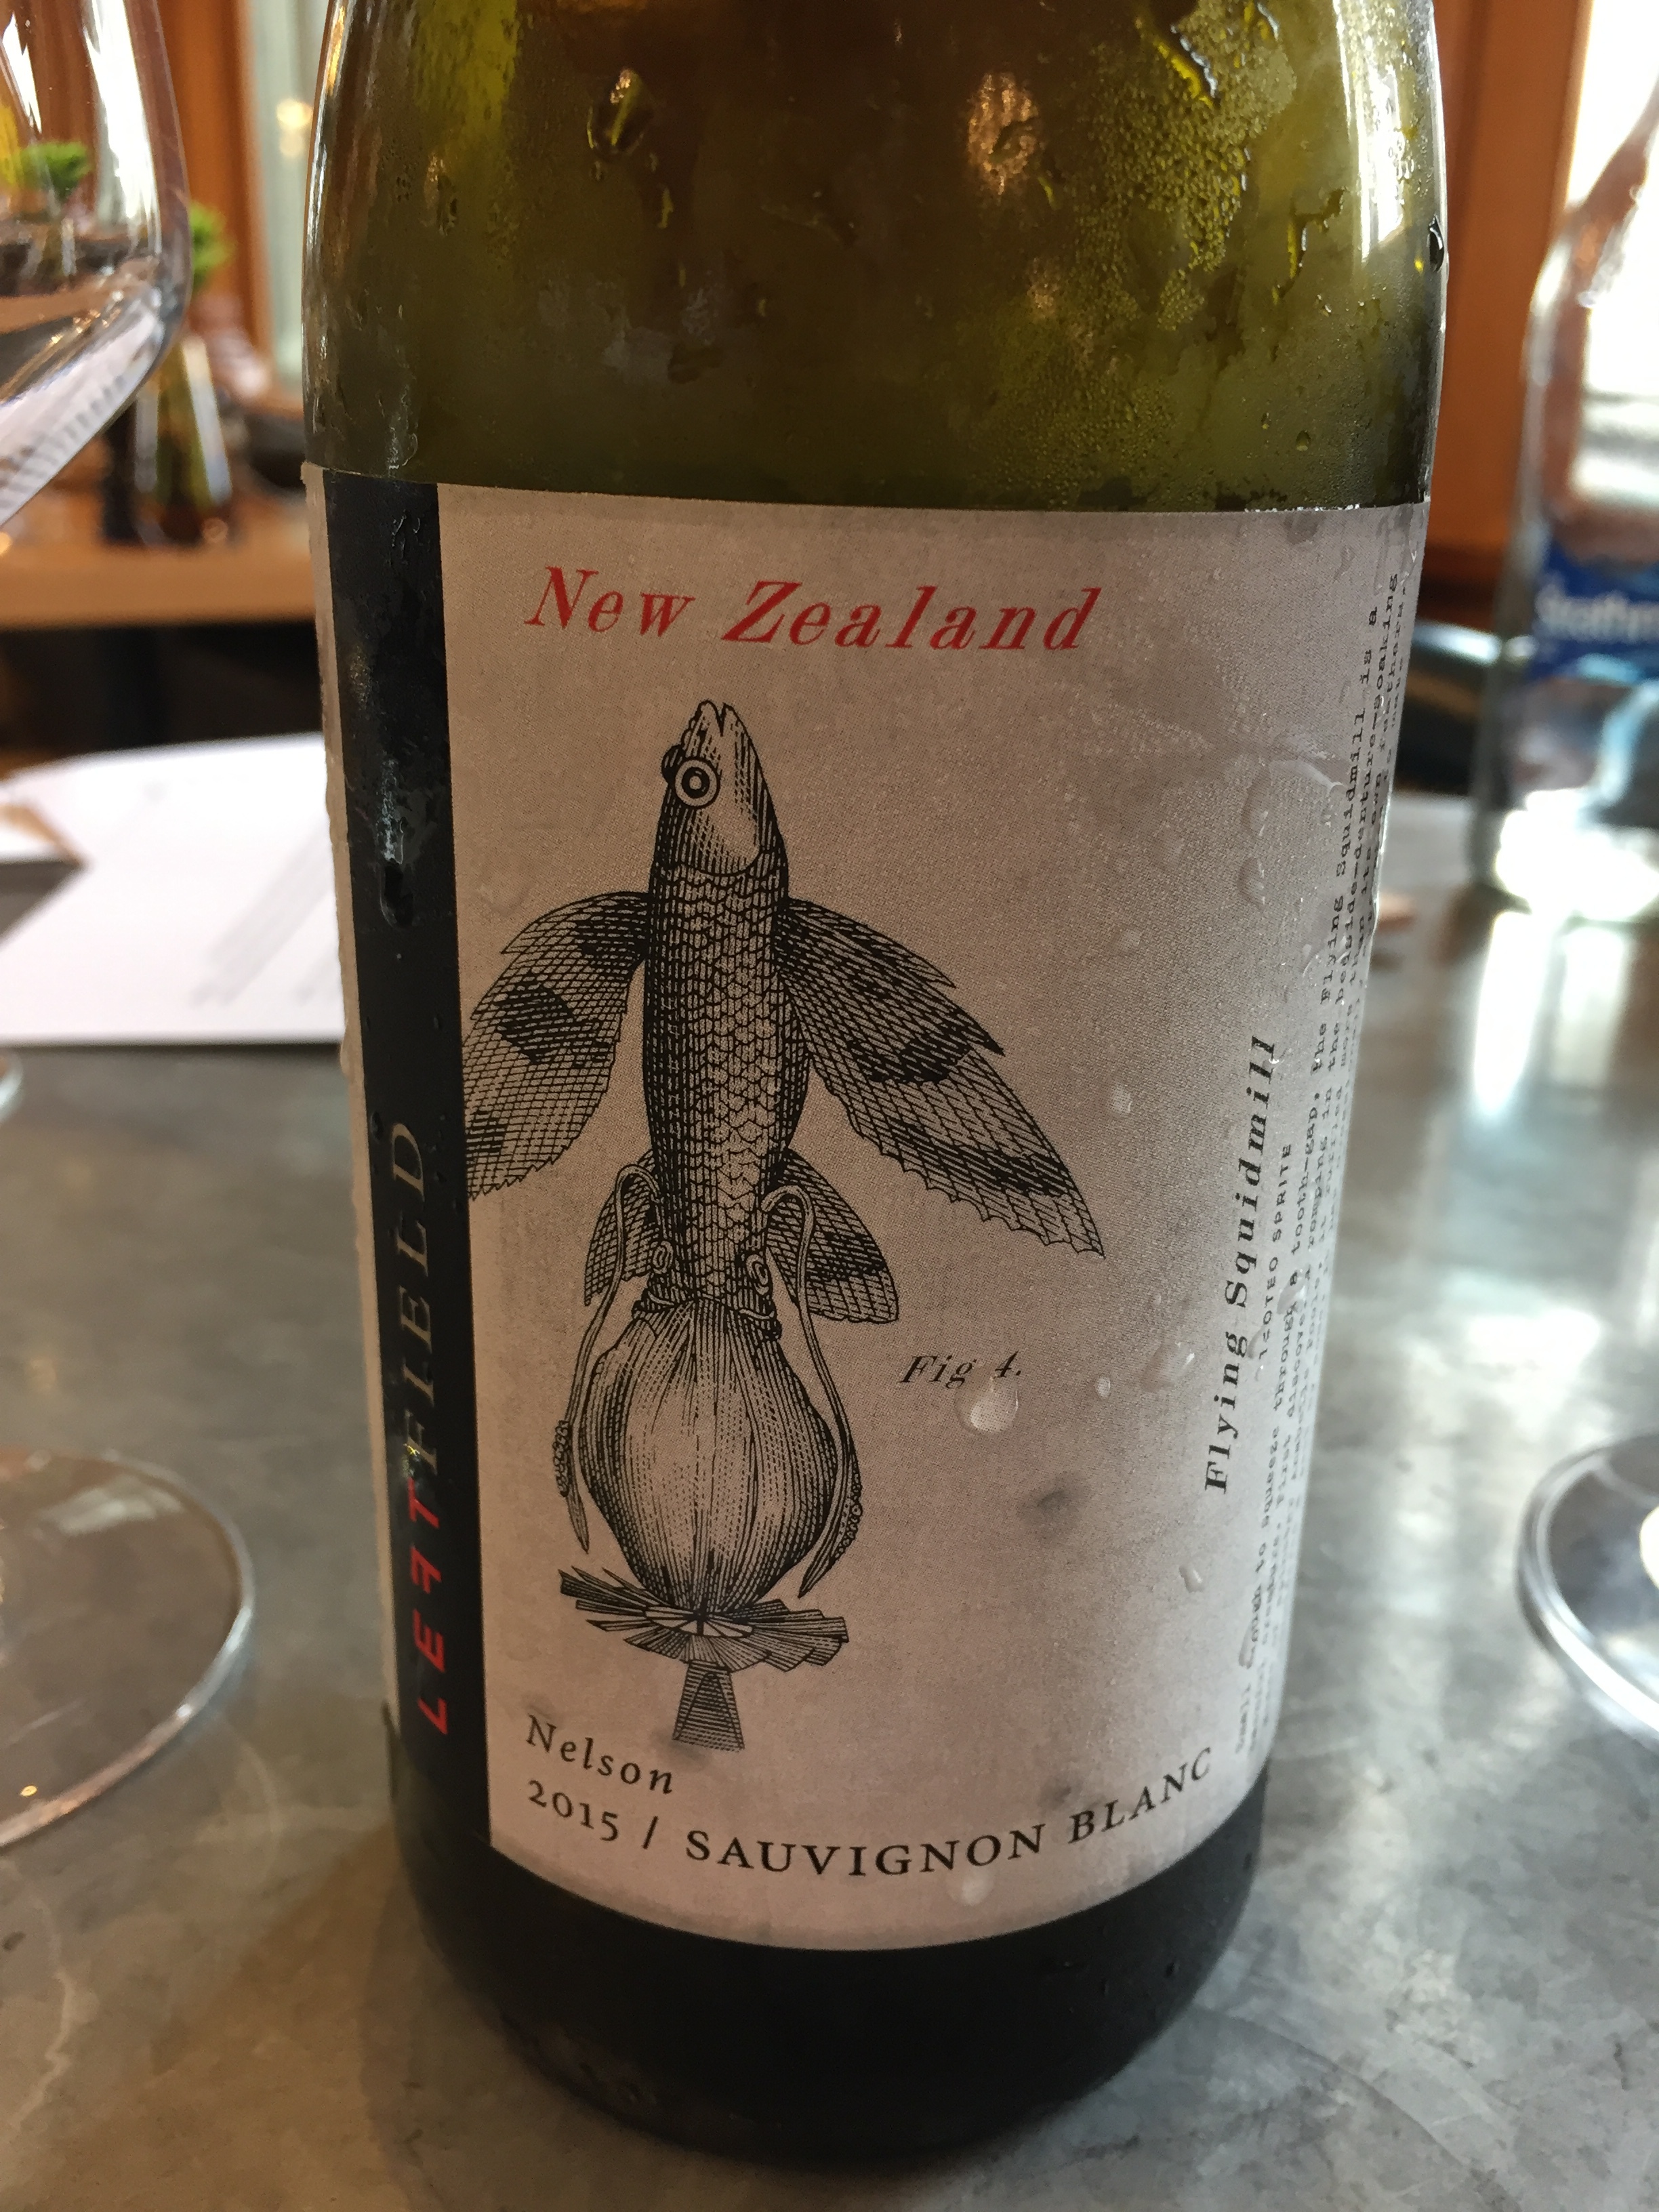 The best white wine has a flying fish on it